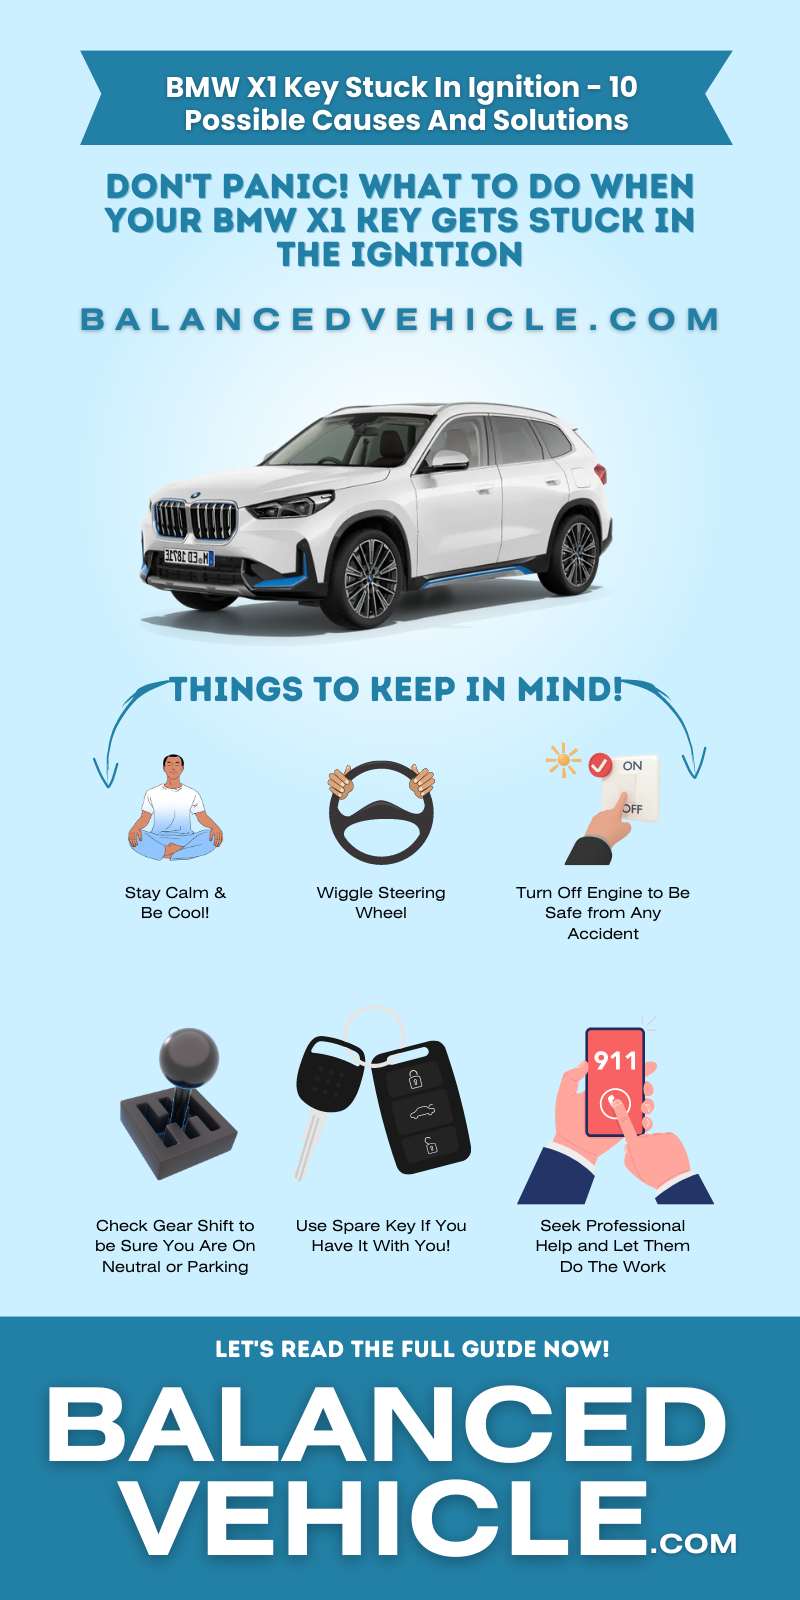 BMW X1 Key Stuck In Ignition - Infographic